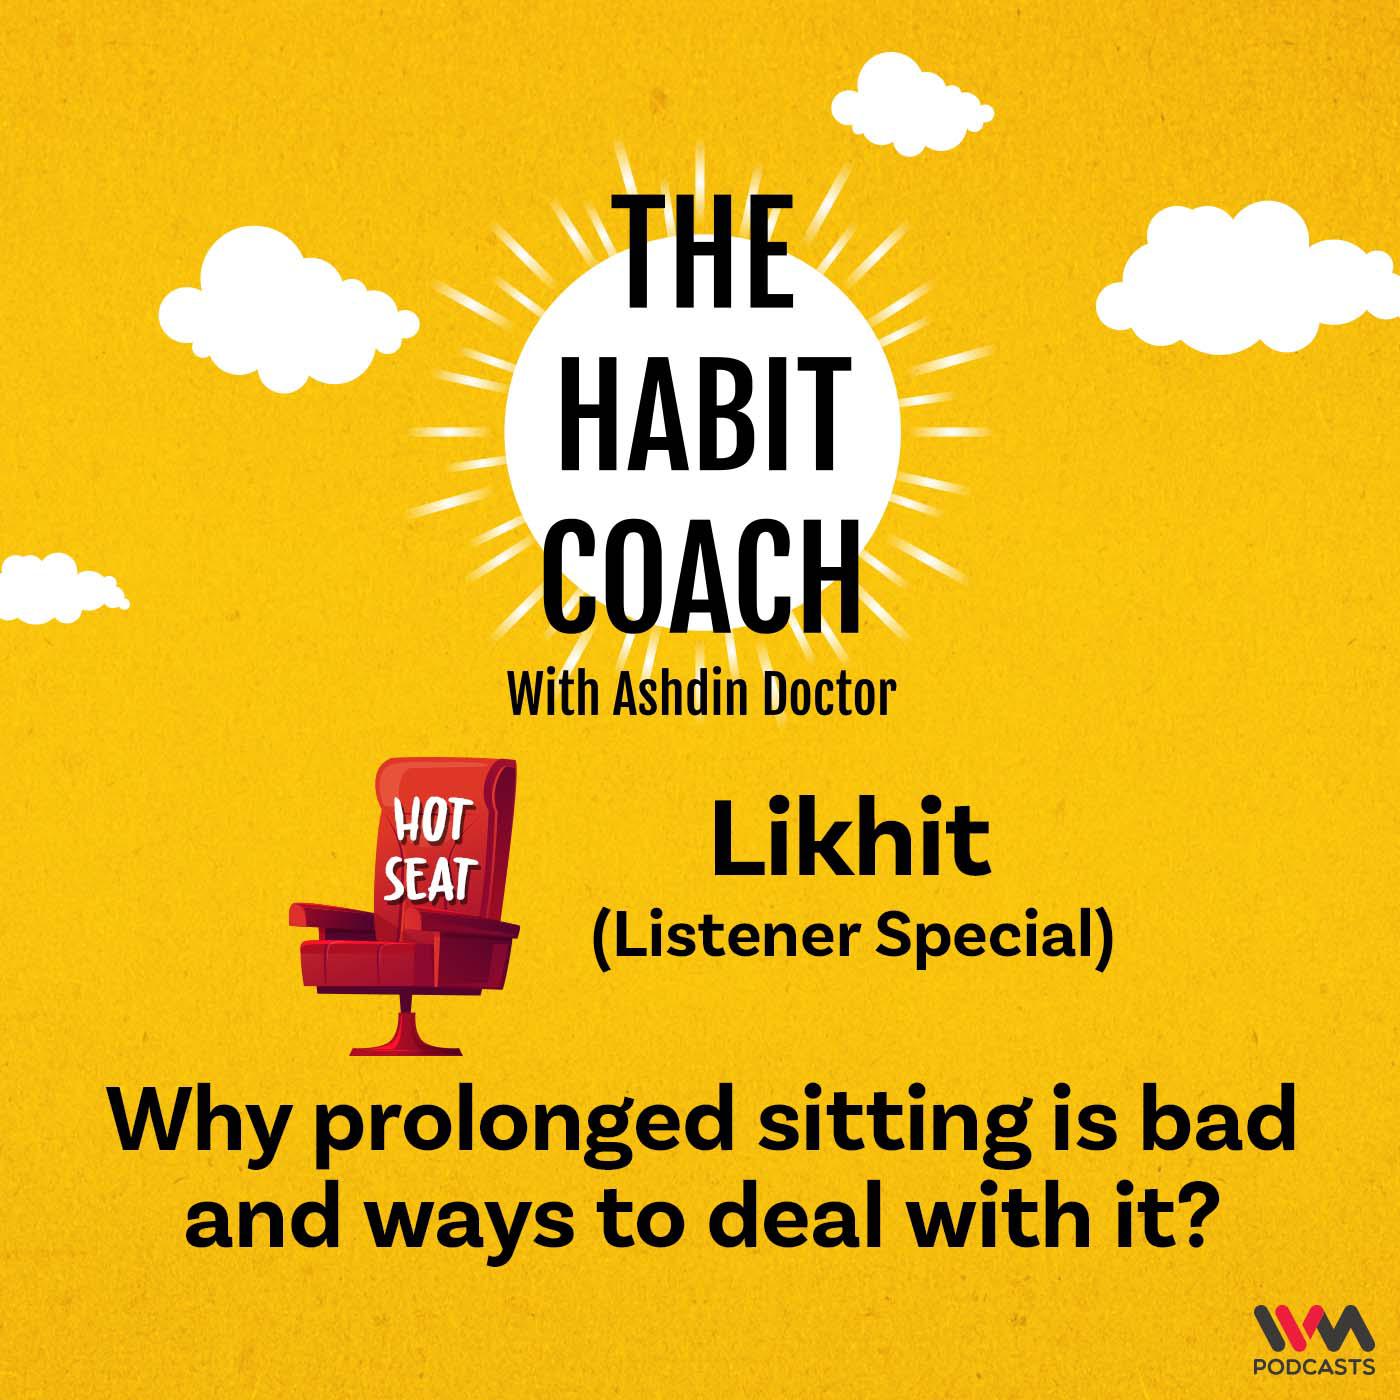 Why prolonged sitting is bad and ways to deal with it? Hot Seat with Likhit (Listener Special)